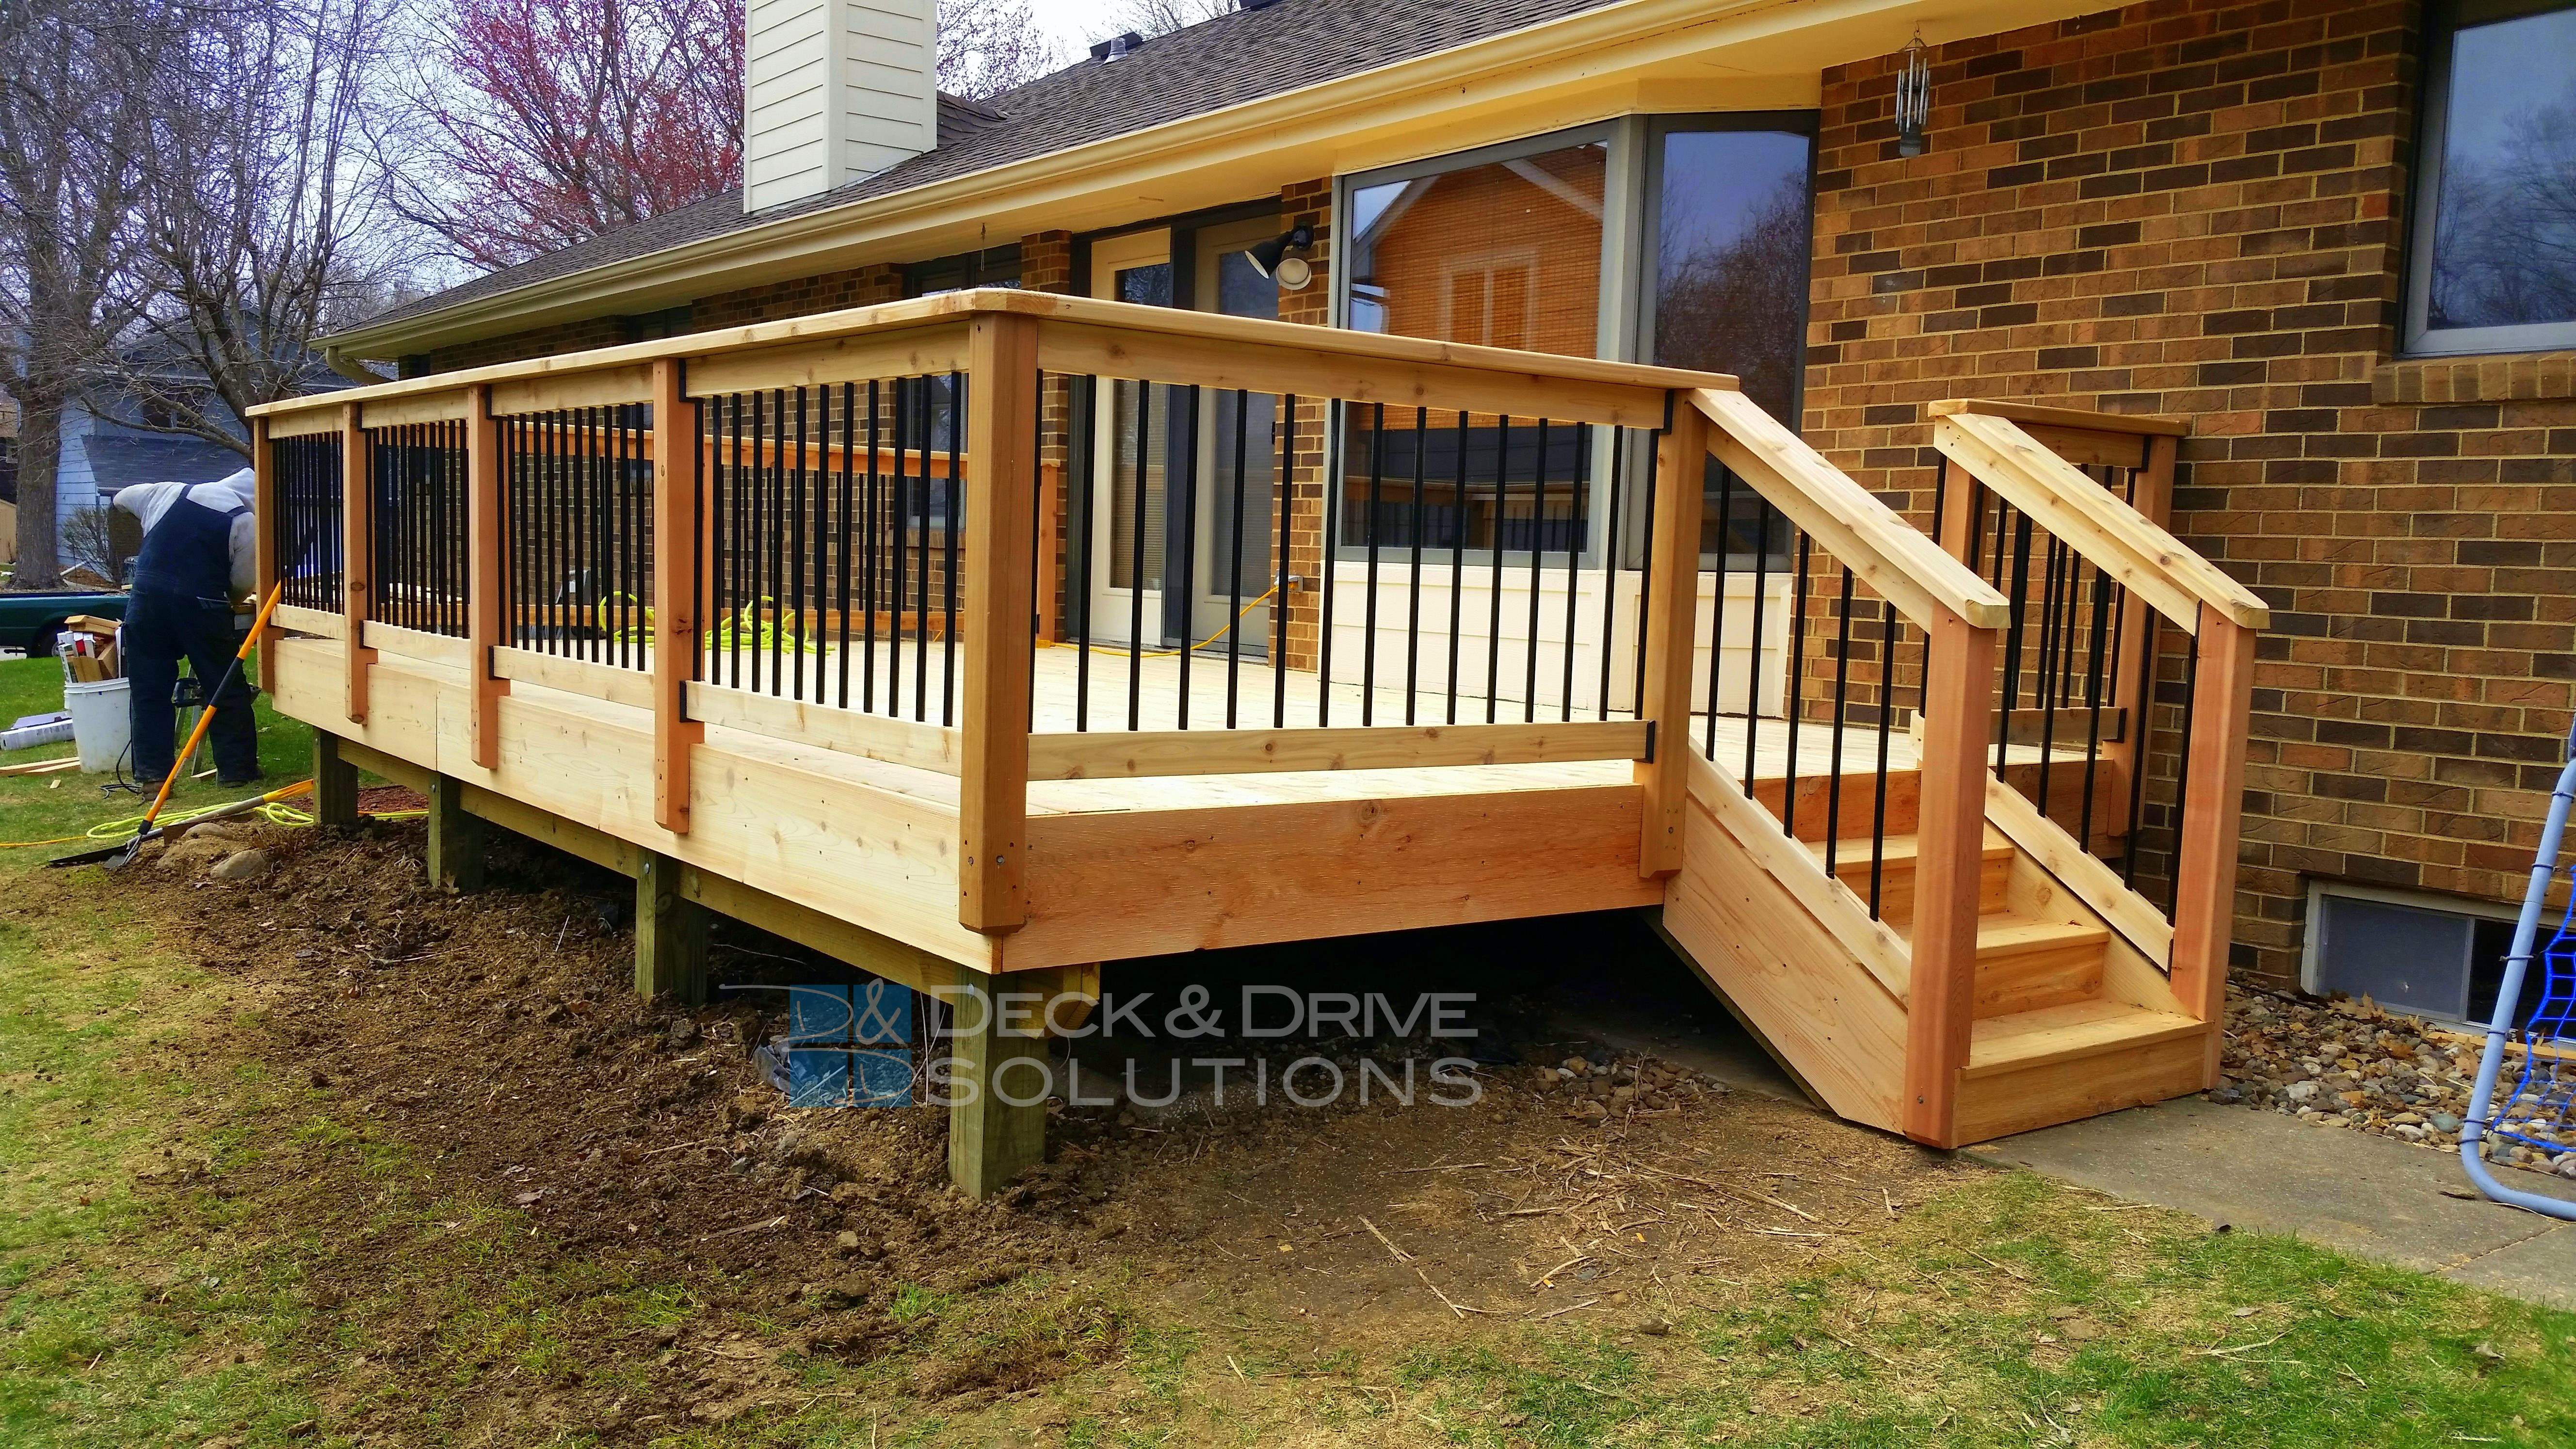 Deck Resurface With Cedar And Cedar Post Rail With Round Metal with regard to dimensions 5312 X 2988